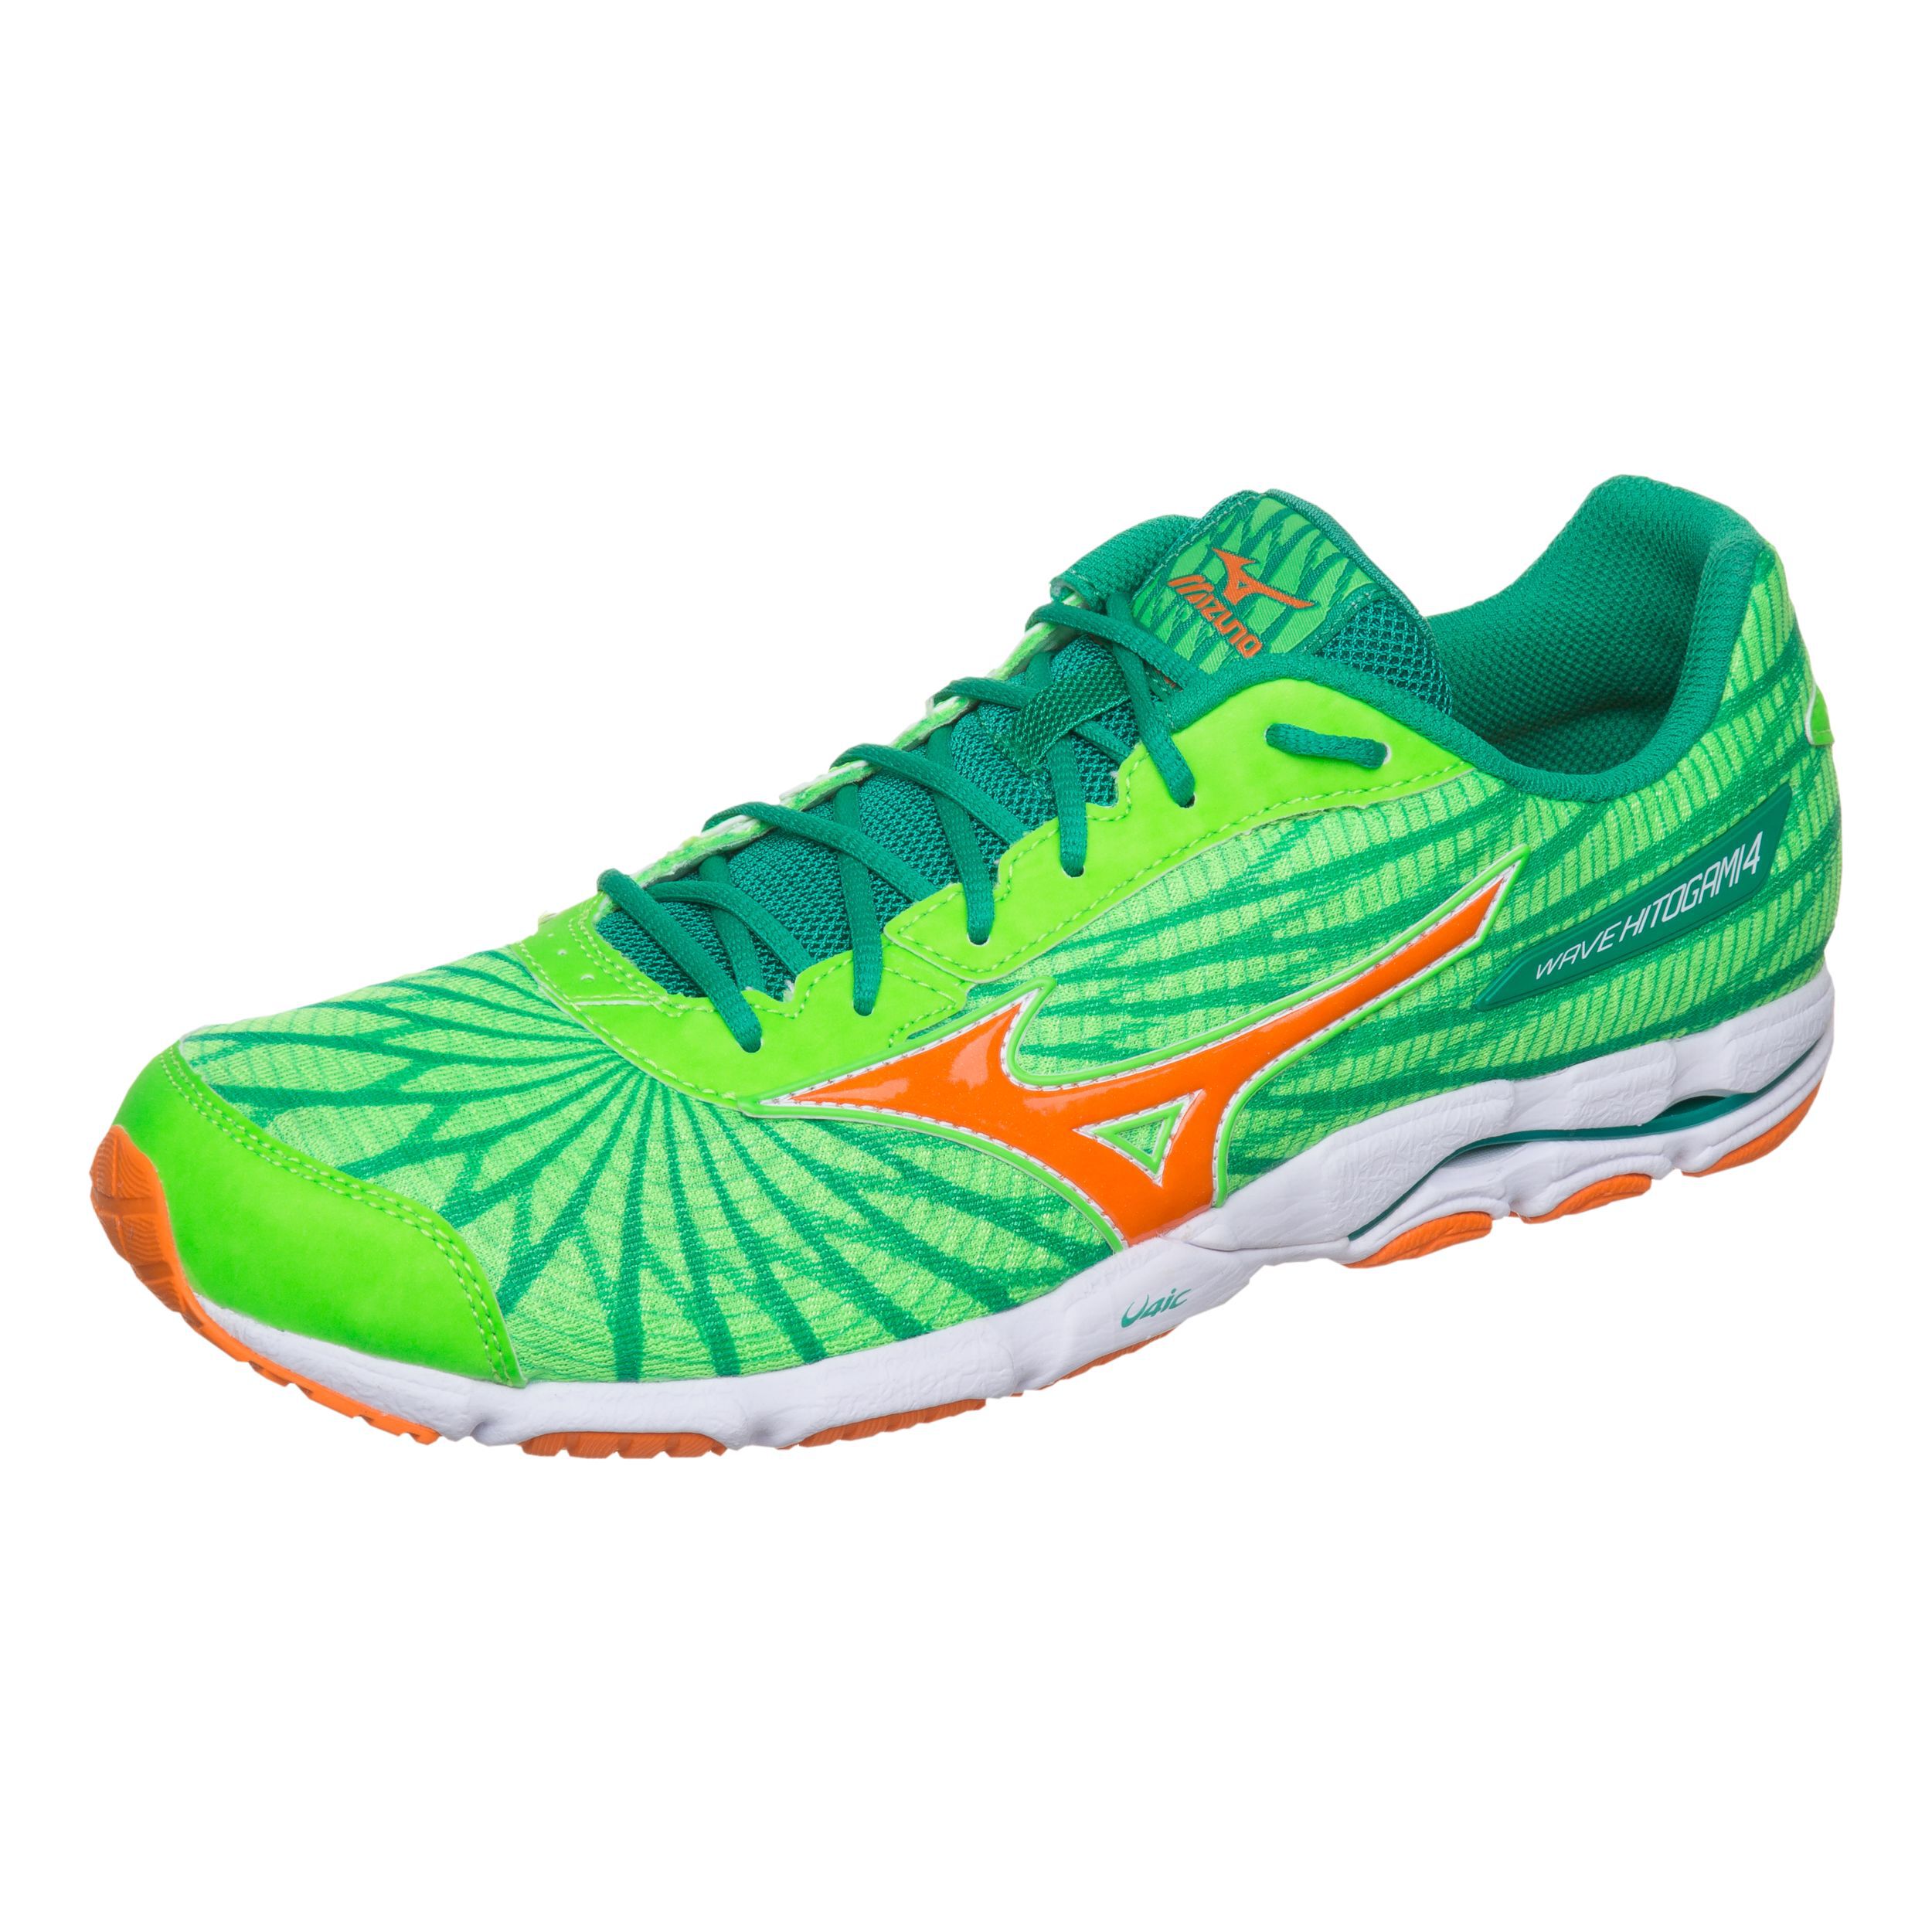 Reconcile Rational on Mizuno Hitogami 4 Mens Hotsell, 57% OFF | www.chine-magazine.com